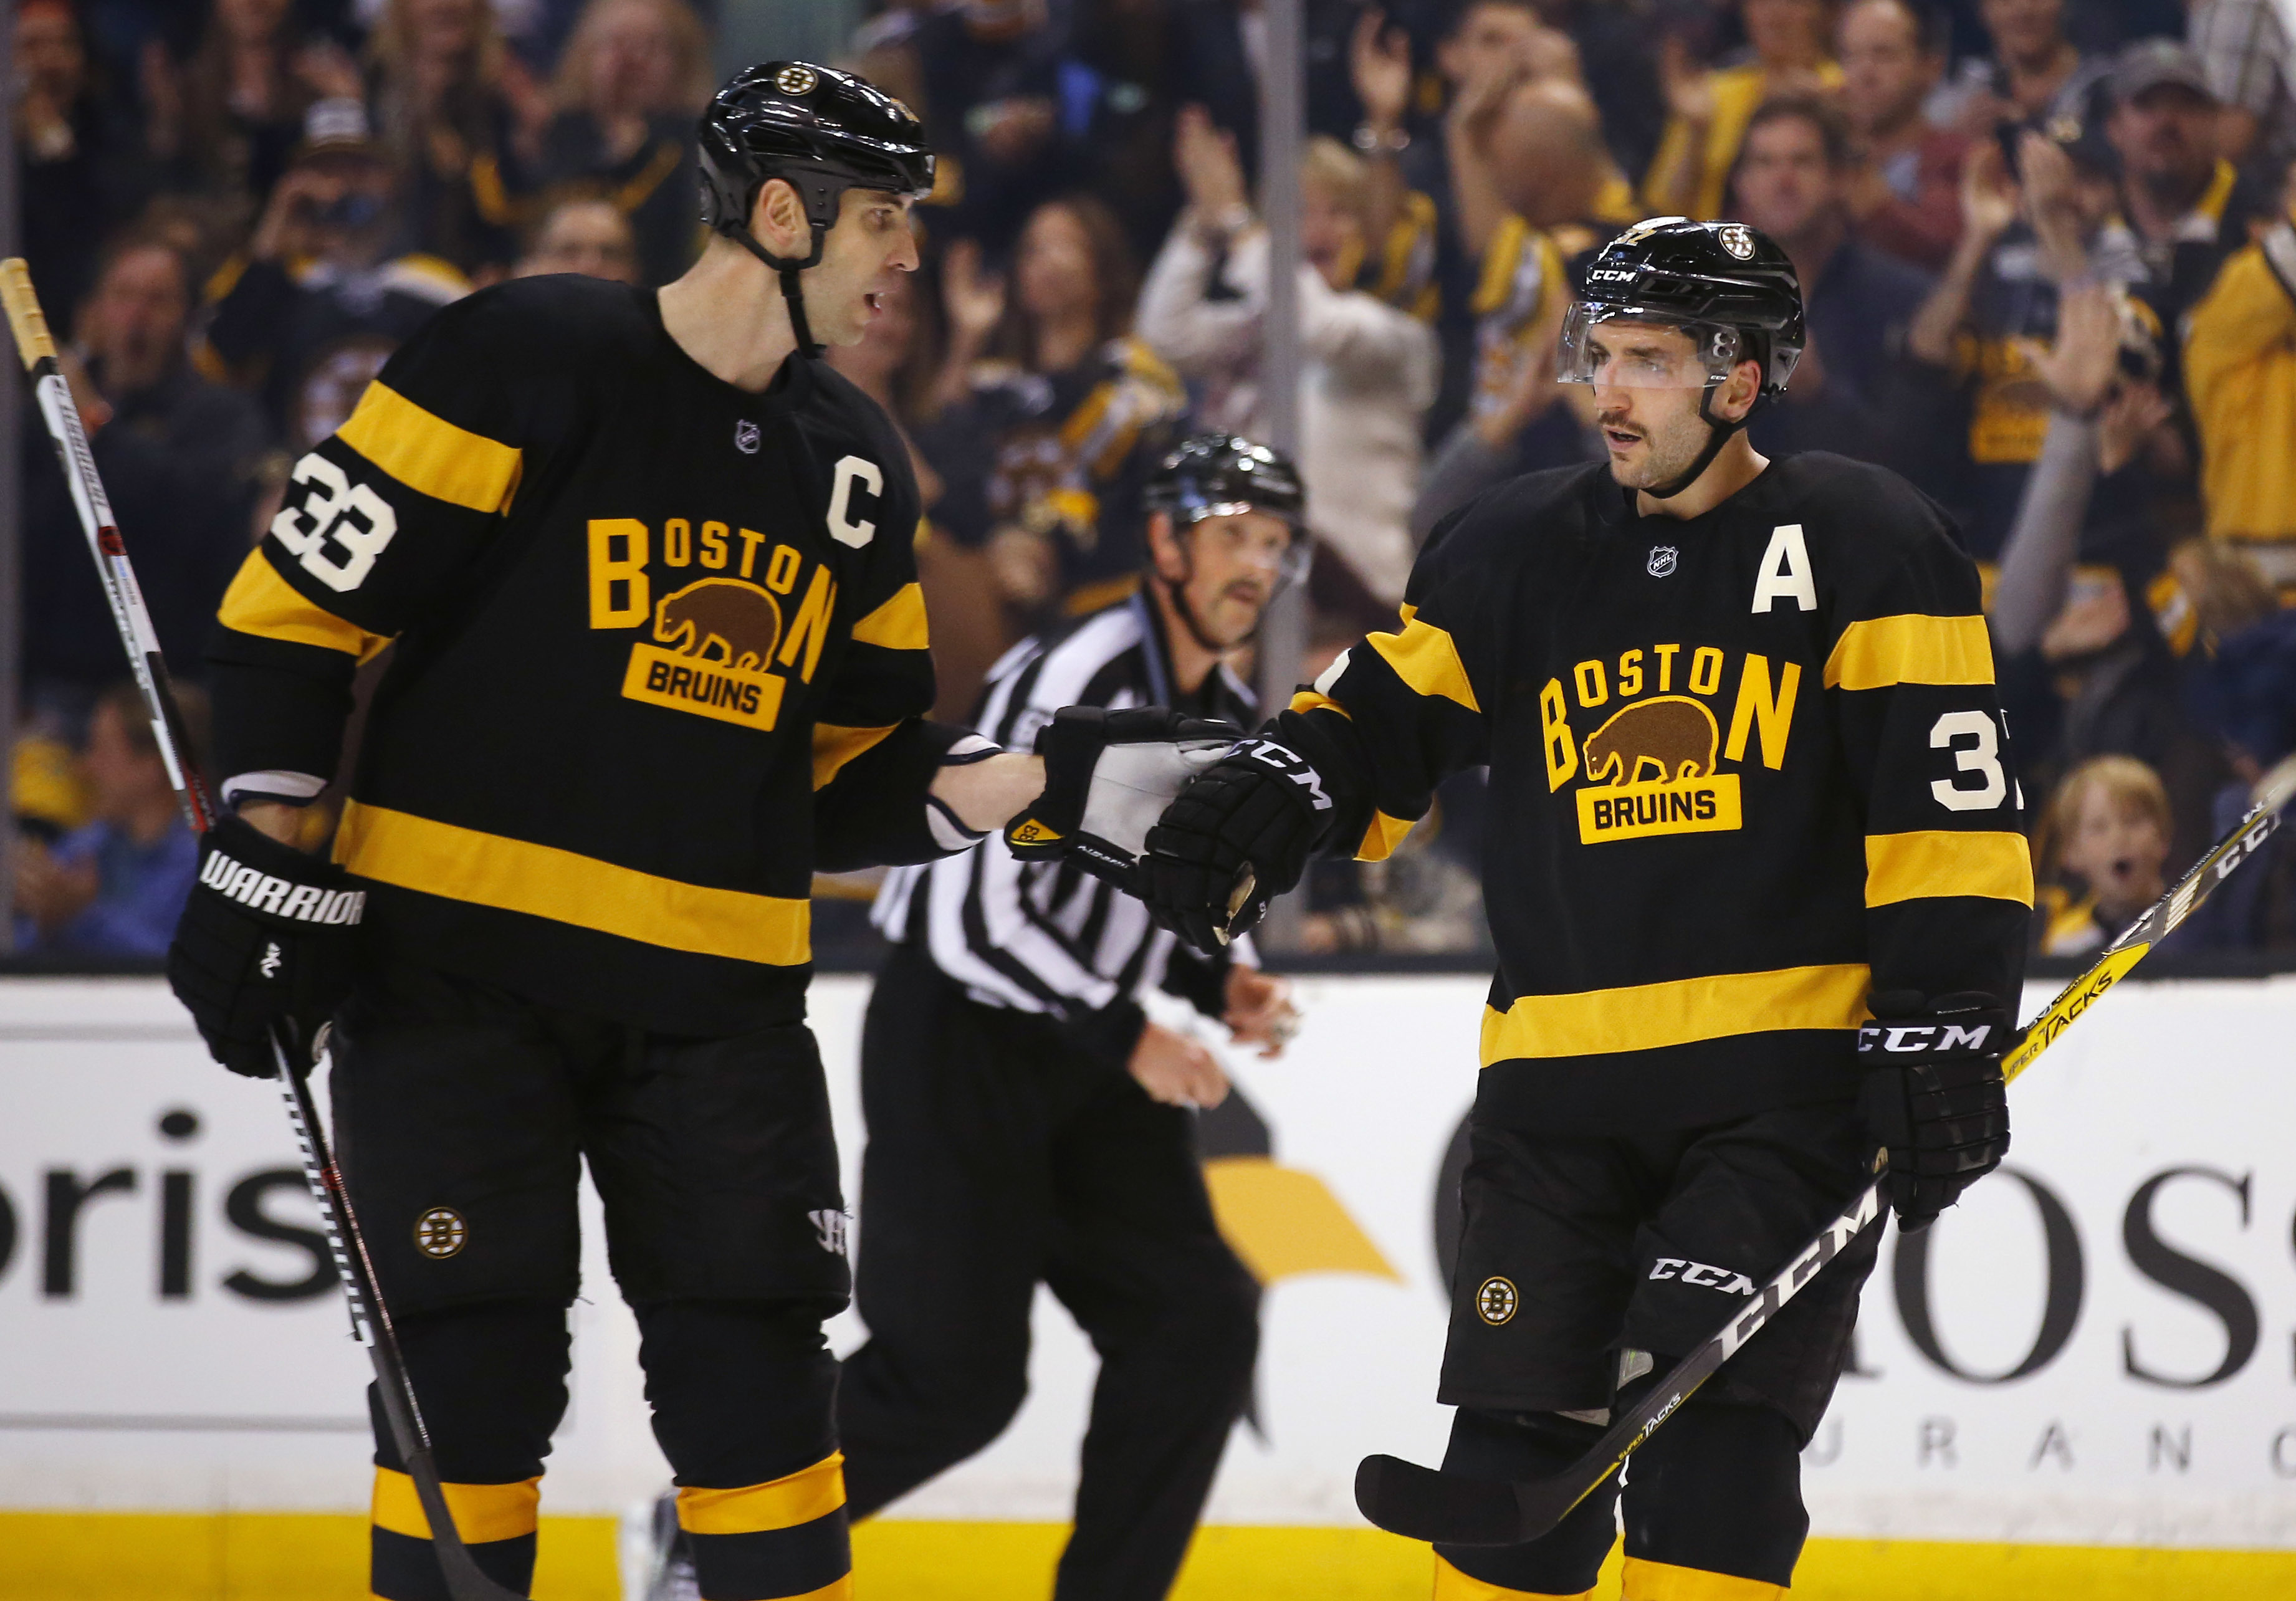 The next to wear the “C” for Bruins: Patrice Bergeron the A+